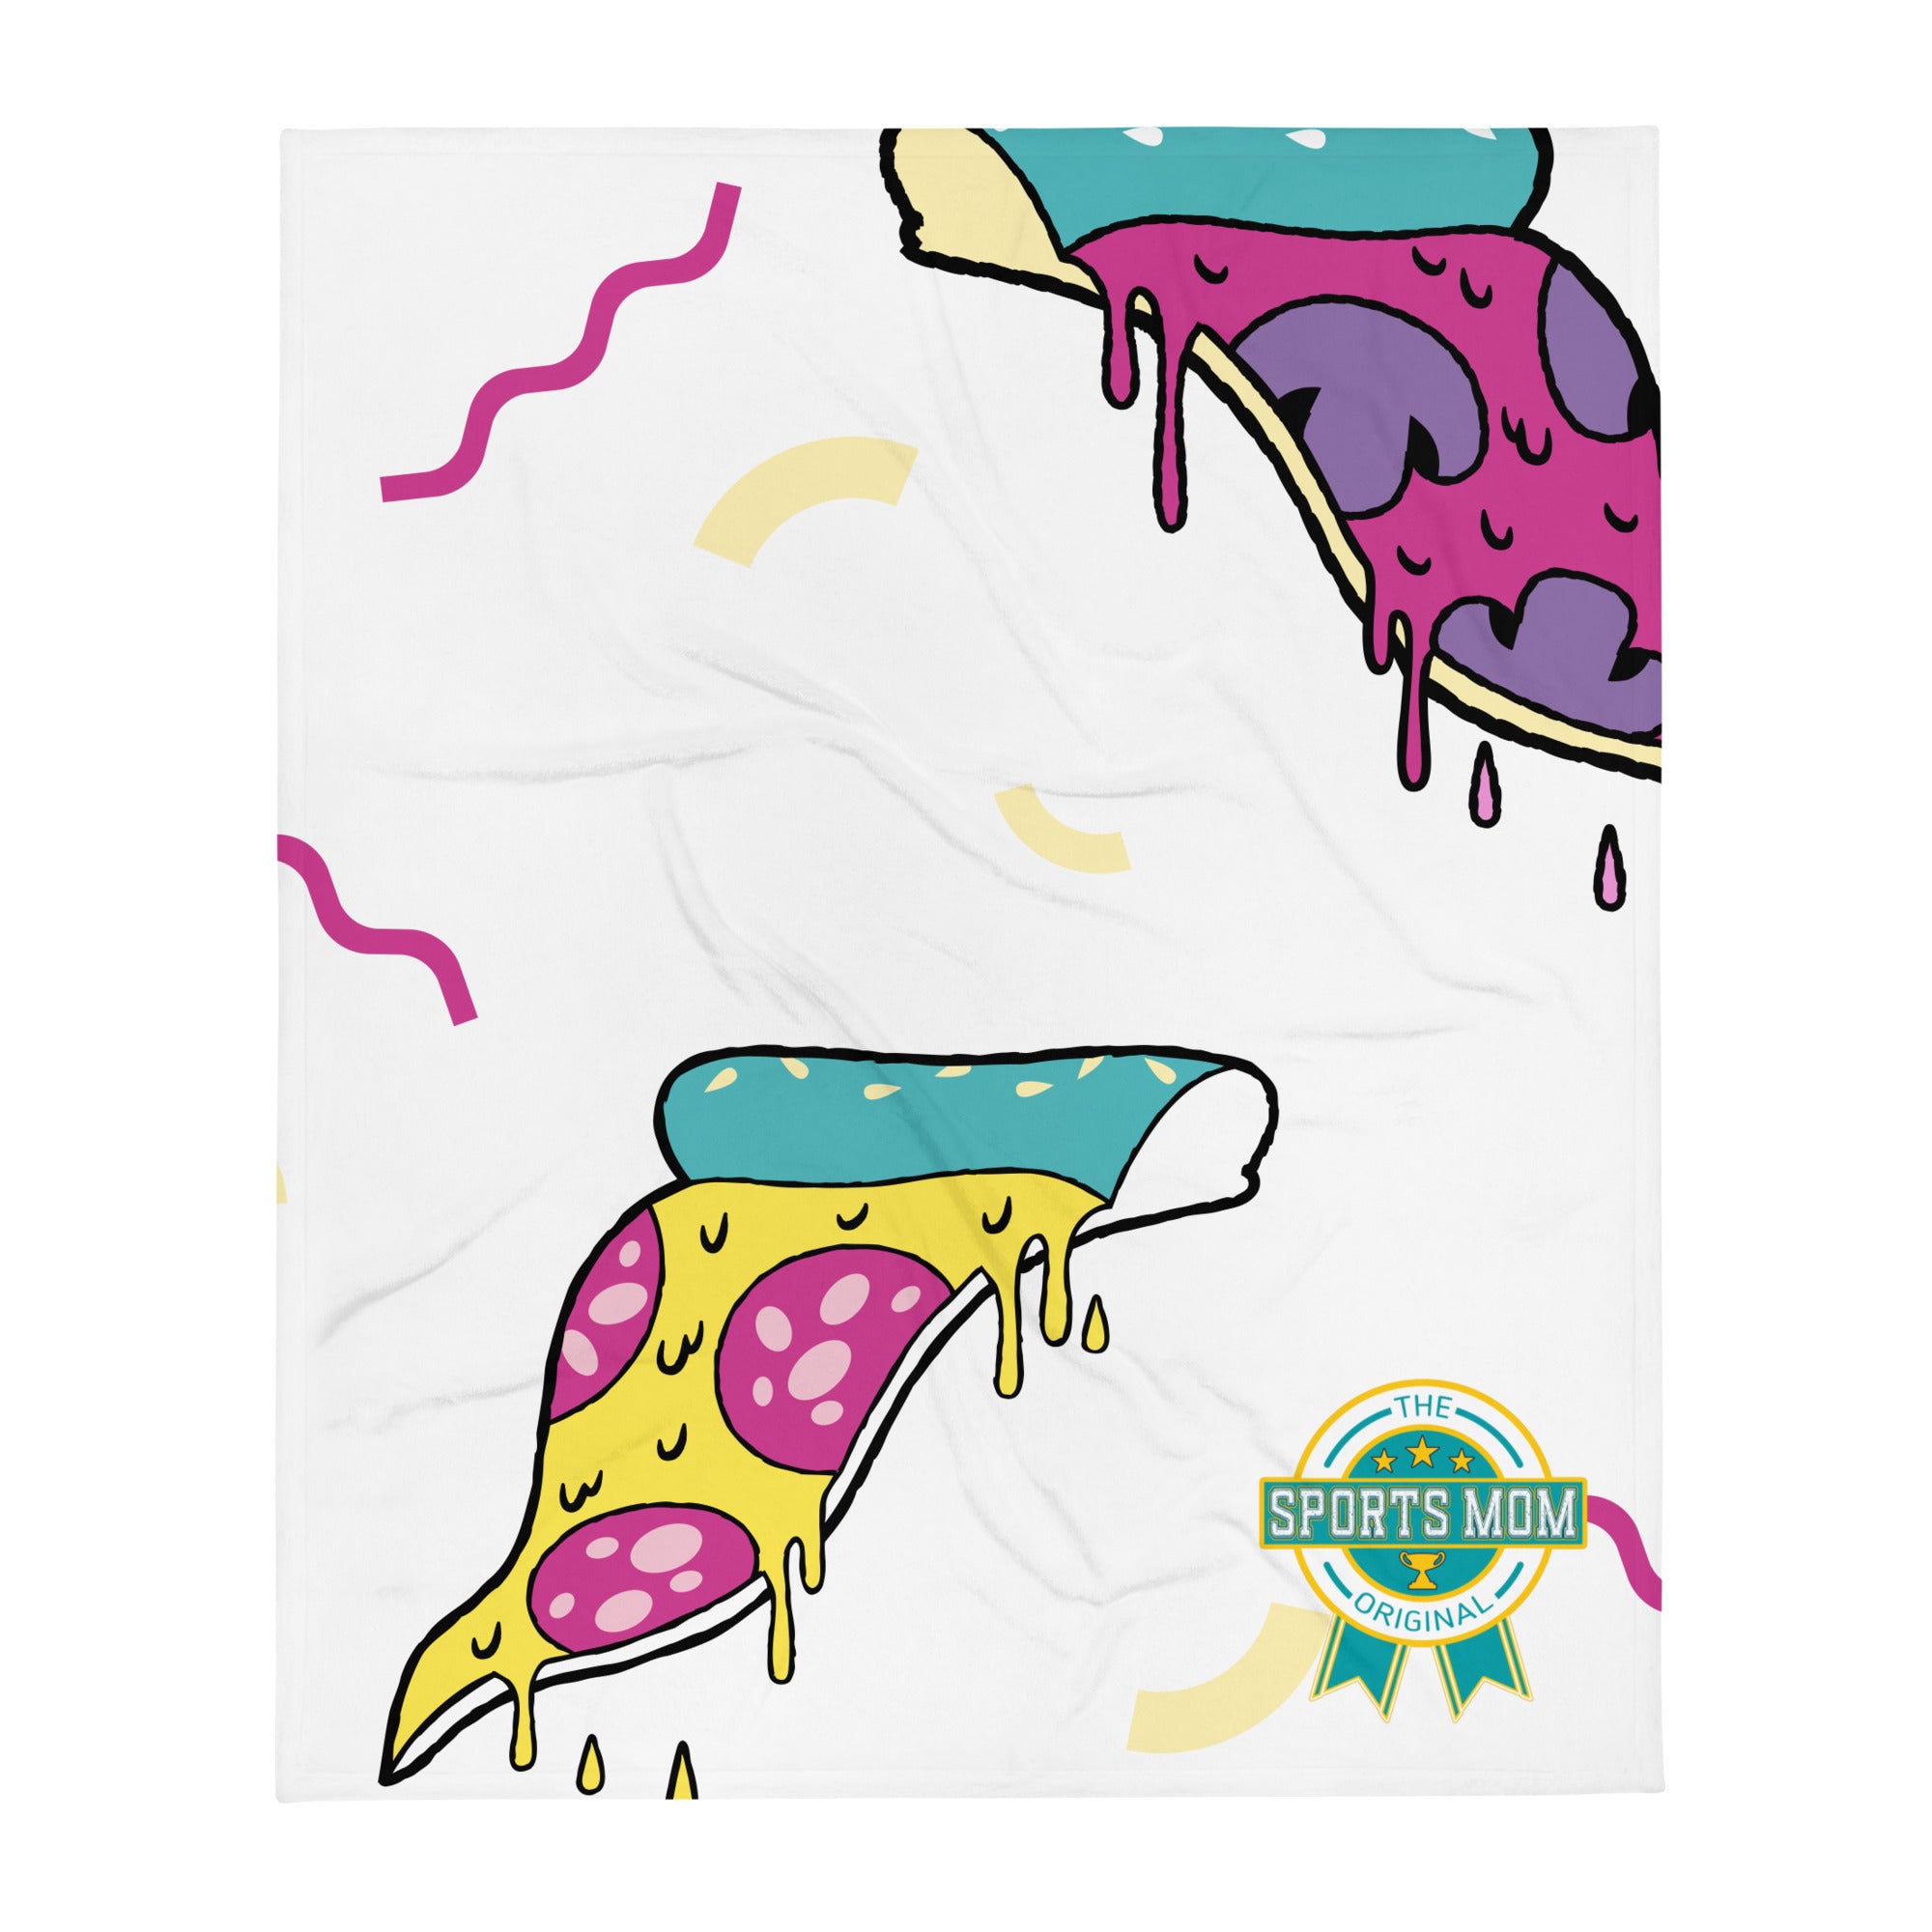 The Original Sports Mom Throw Blanket - Crazy Pizza Party!